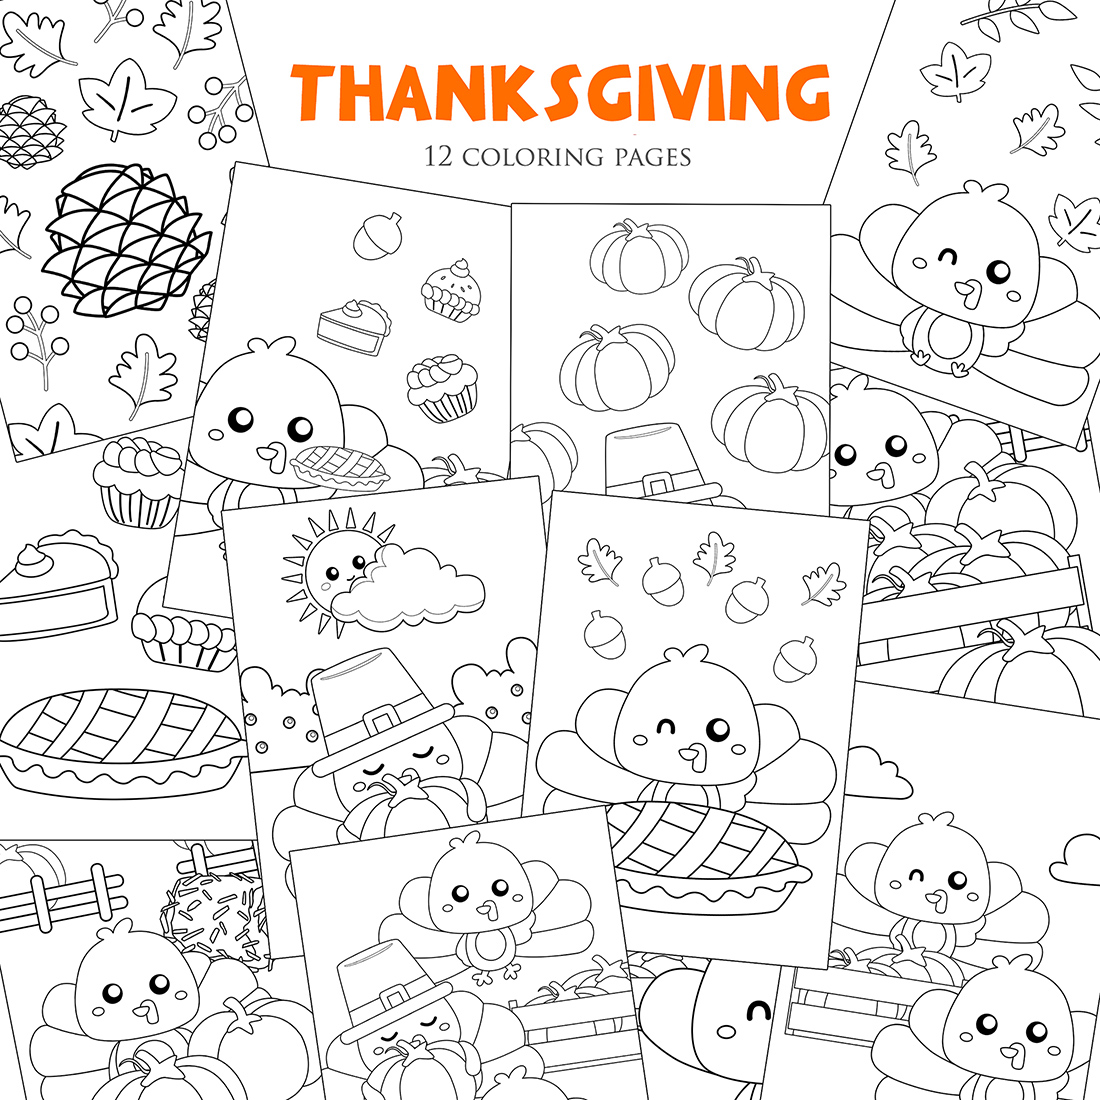 Thanksgiving turkey bird garden party decoration animal and food pie season holiday background cartoon coloring pages for kids and adult